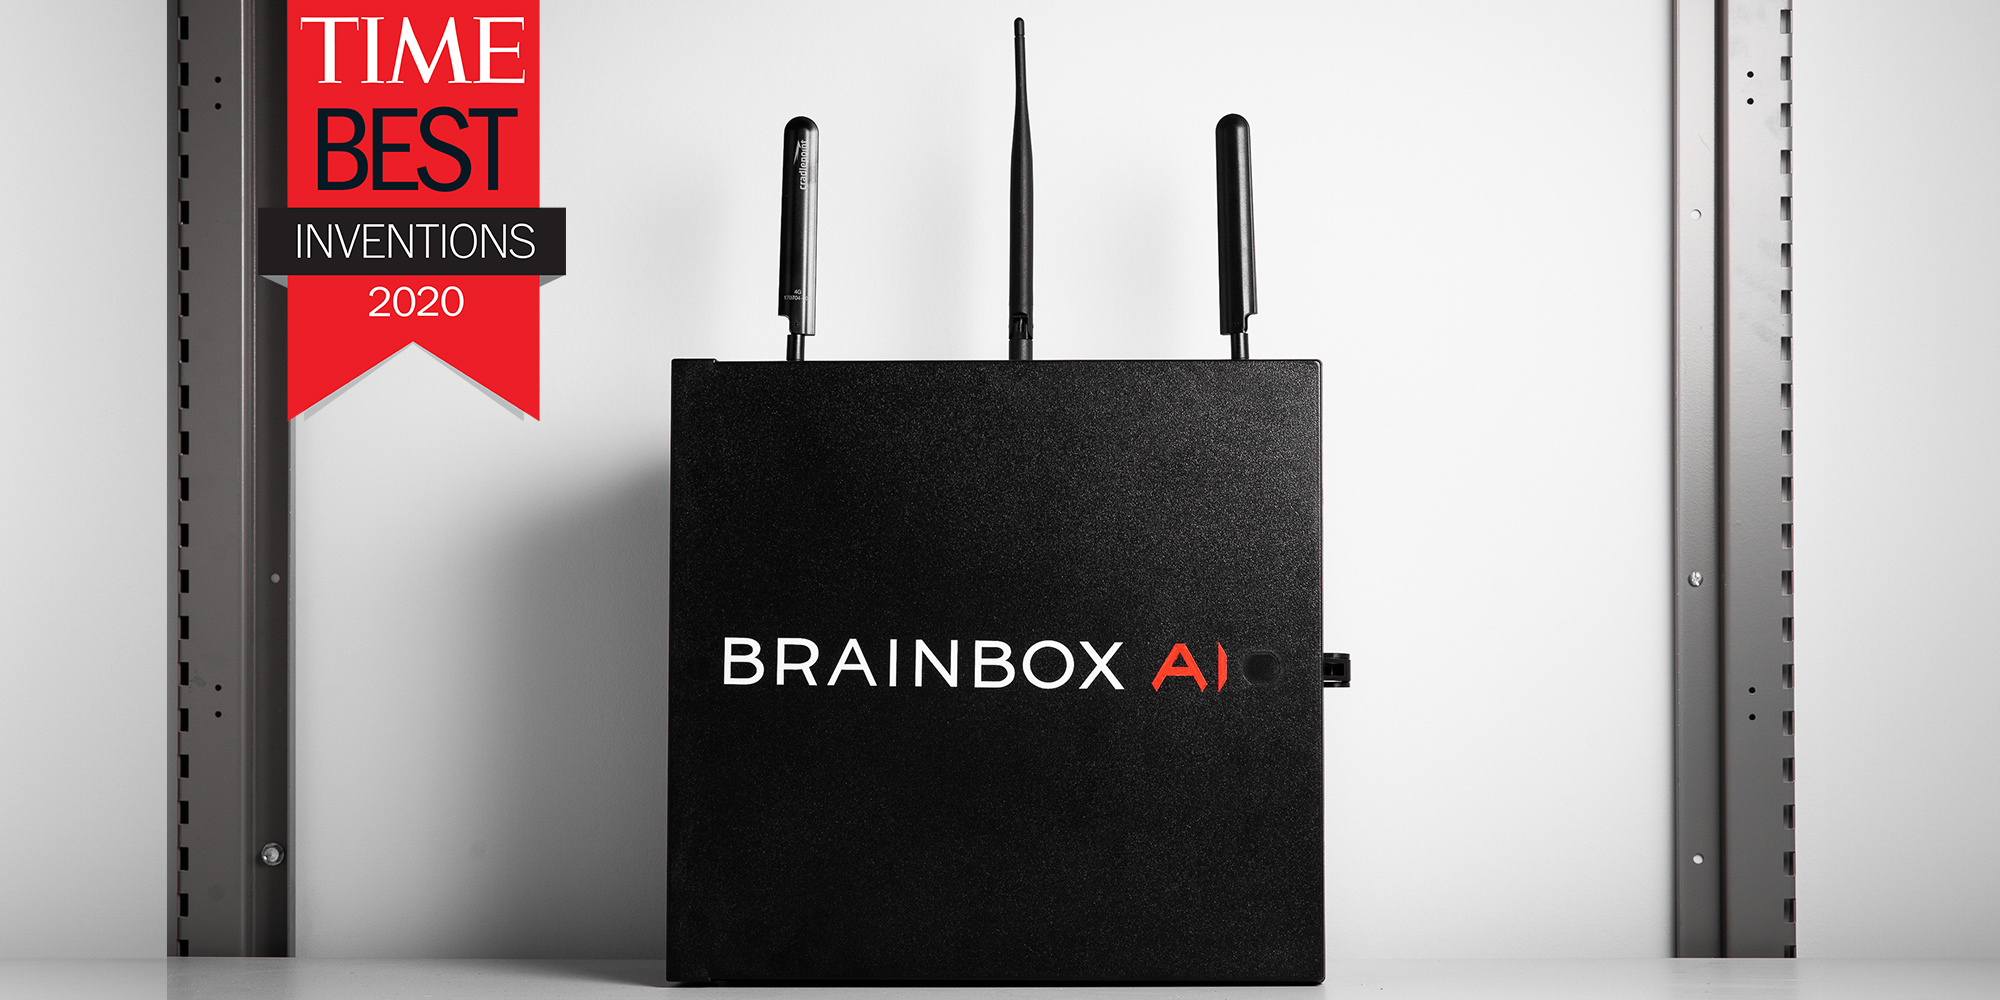 Canadian Company BrainBox AI Recognized by TIME as a Best Invention of 2020